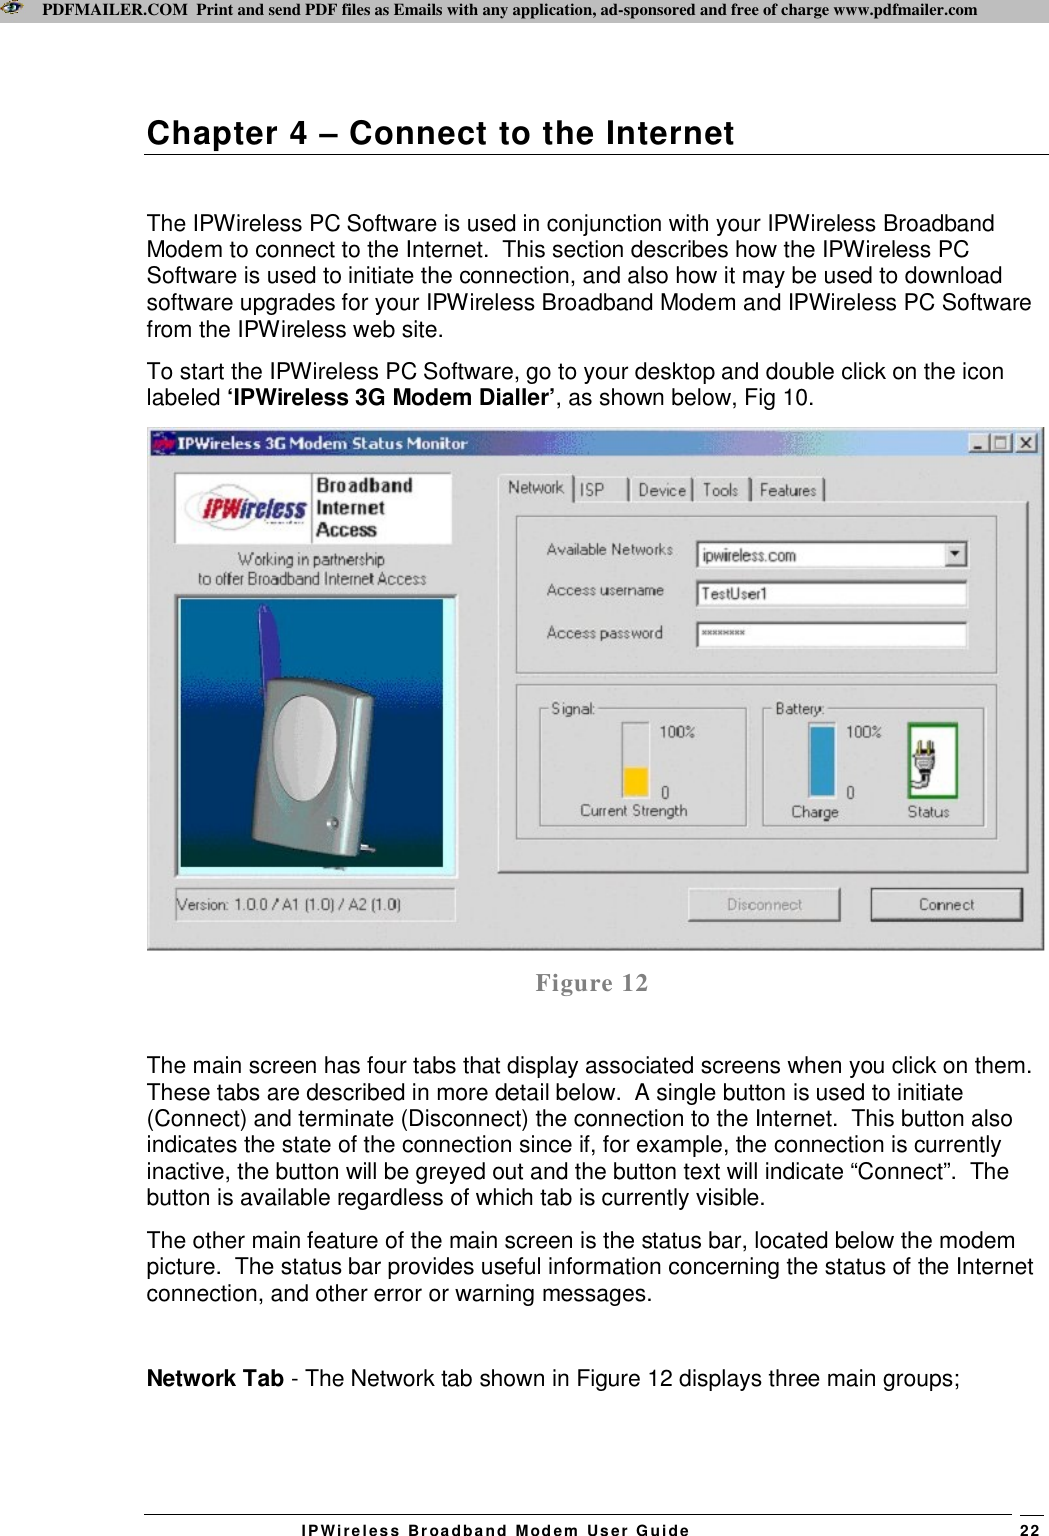 PDFMAILER.COM  Print and send PDF files as Emails with any application, ad-sponsored and free of charge www.pdfmailer.com  IPWireles s  Br oadba nd  Modem   User G uide    22 Chapter 4 – Connect to the Internet  The IPWireless PC Software is used in conjunction with your IPWireless Broadband Modem to connect to the Internet.  This section describes how the IPWireless PC Software is used to initiate the connection, and also how it may be used to download software upgrades for your IPWireless Broadband Modem and IPWireless PC Software from the IPWireless web site. To start the IPWireless PC Software, go to your desktop and double click on the icon labeled ‘IPWireless 3G Modem Dialler’, as shown below, Fig 10.  Figure 12  The main screen has four tabs that display associated screens when you click on them.  These tabs are described in more detail below.  A single button is used to initiate (Connect) and terminate (Disconnect) the connection to the Internet.  This button also indicates the state of the connection since if, for example, the connection is currently inactive, the button will be greyed out and the button text will indicate “Connect”.  The button is available regardless of which tab is currently visible.  The other main feature of the main screen is the status bar, located below the modem picture.  The status bar provides useful information concerning the status of the Internet connection, and other error or warning messages.  Network Tab - The Network tab shown in Figure 12 displays three main groups;  